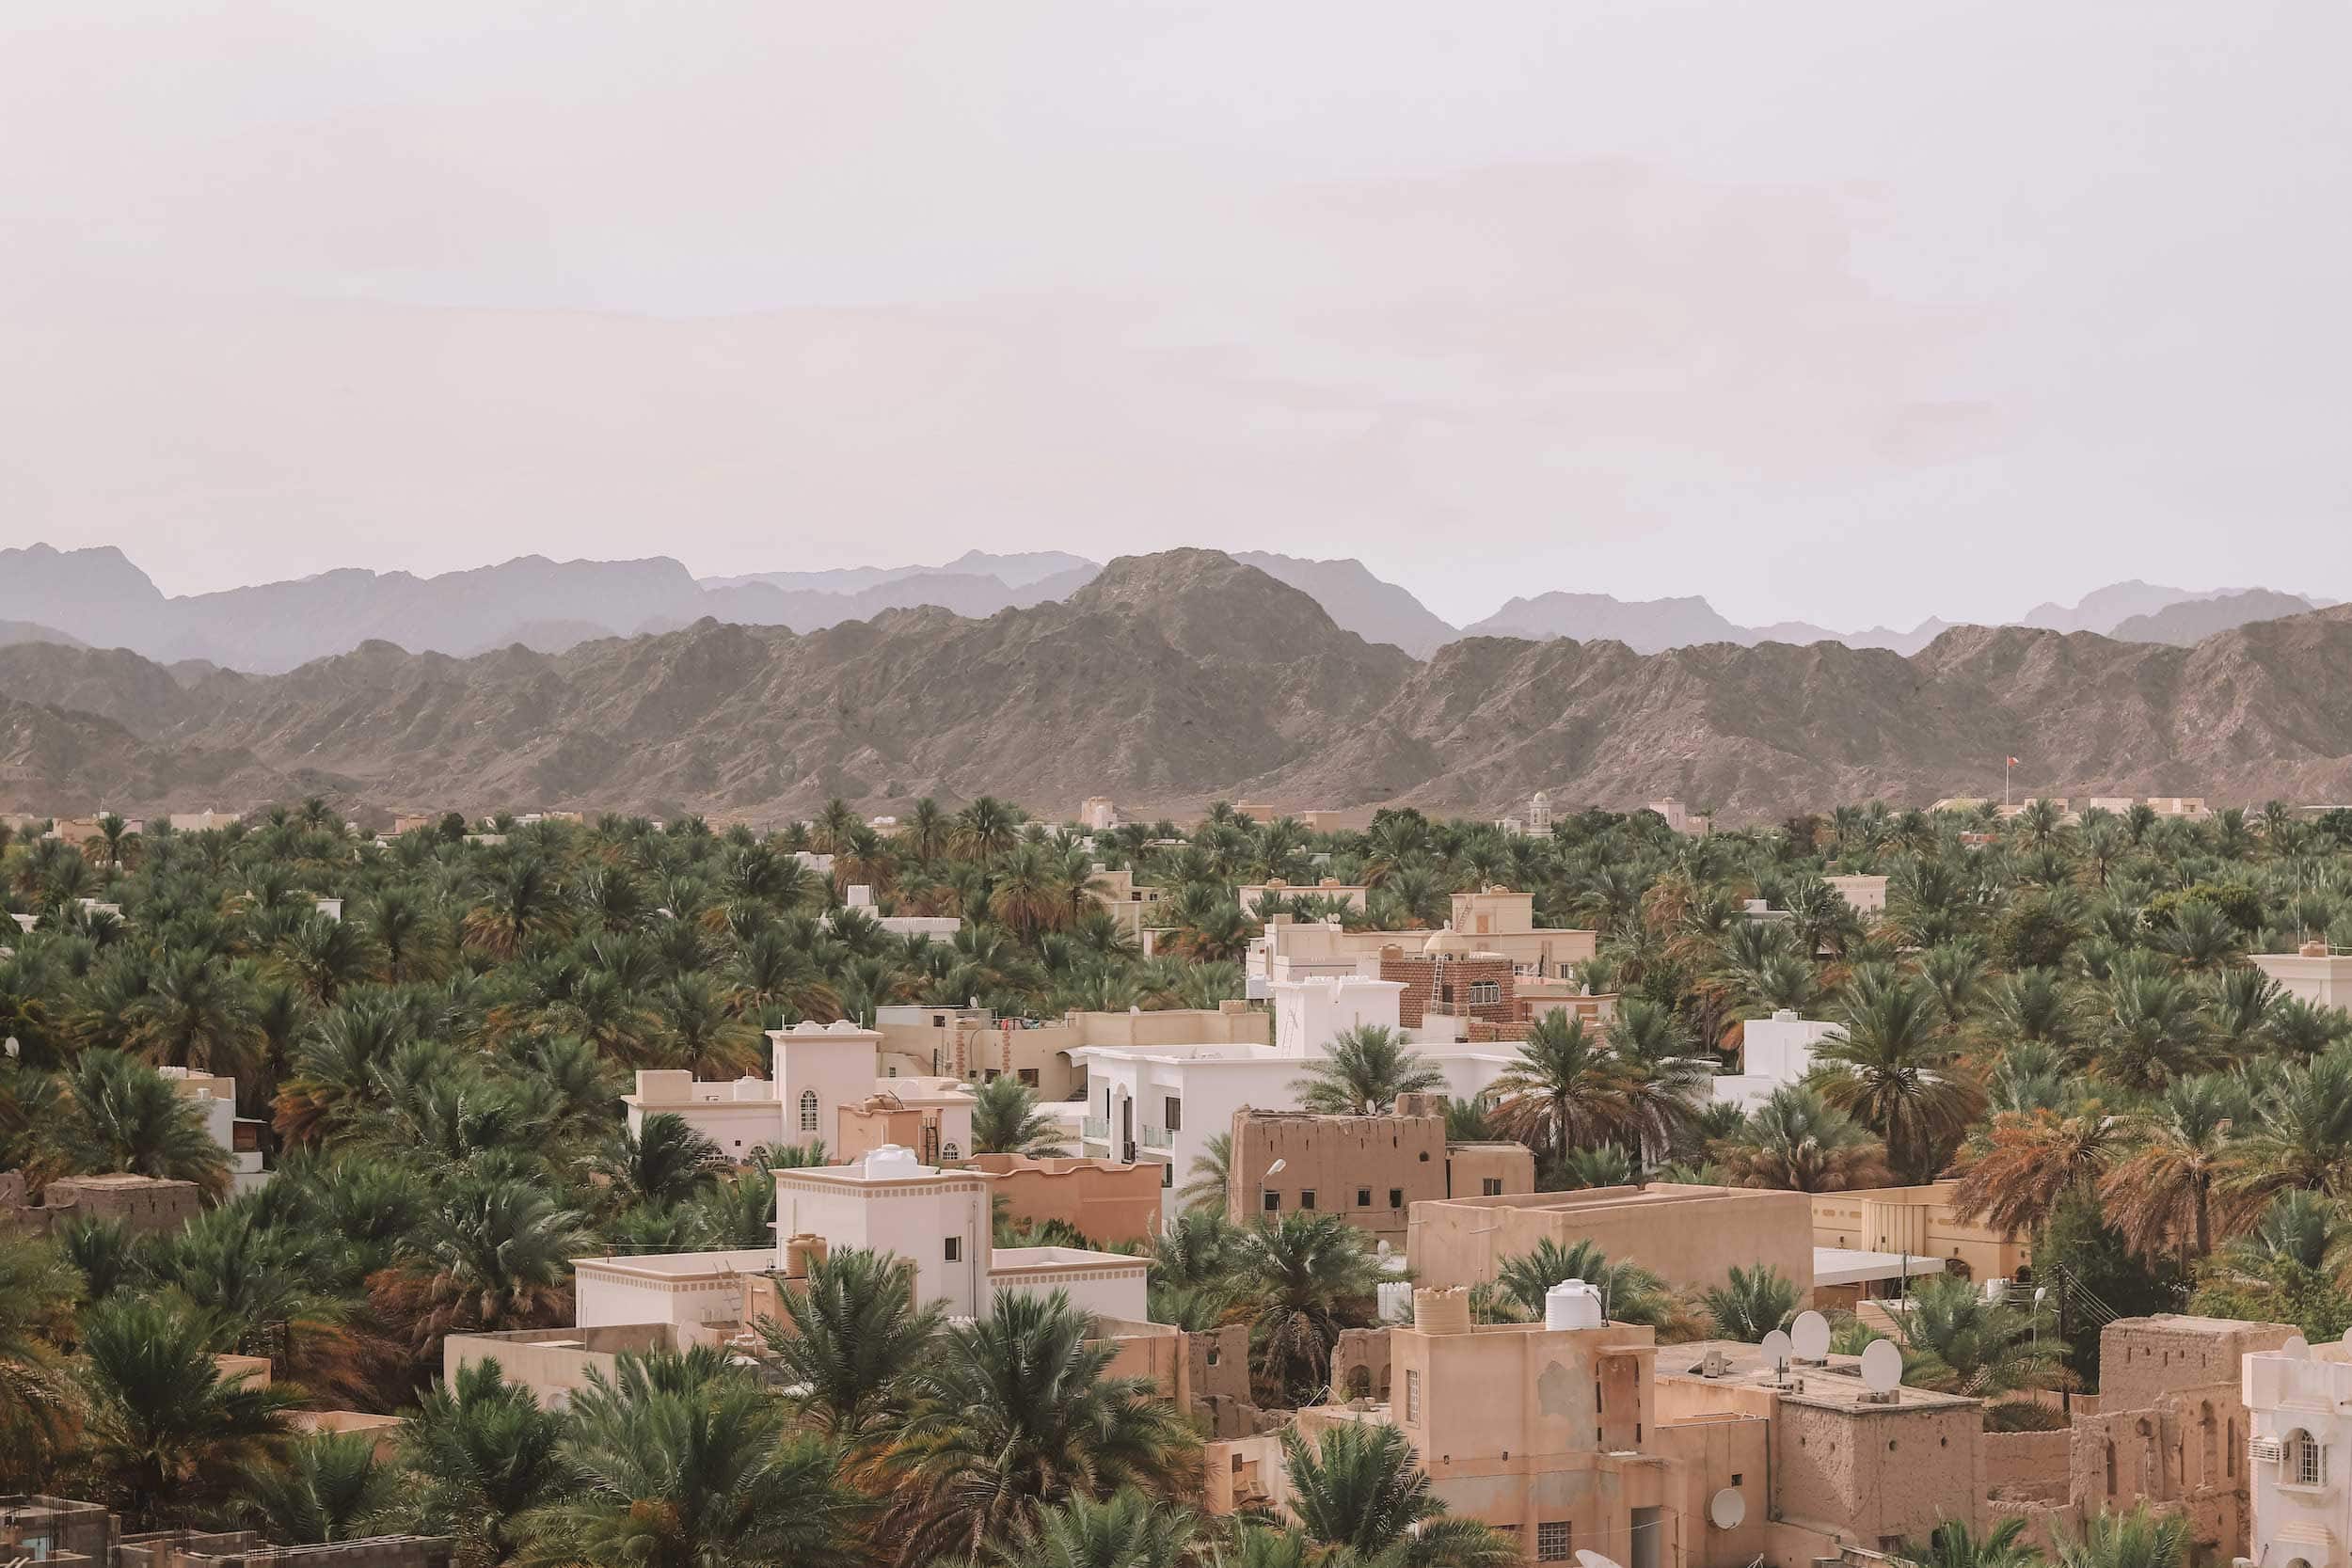 Planning a Road Trip in Oman? Discover the Magic of Oman With This Perfect 2 Week Itinerary